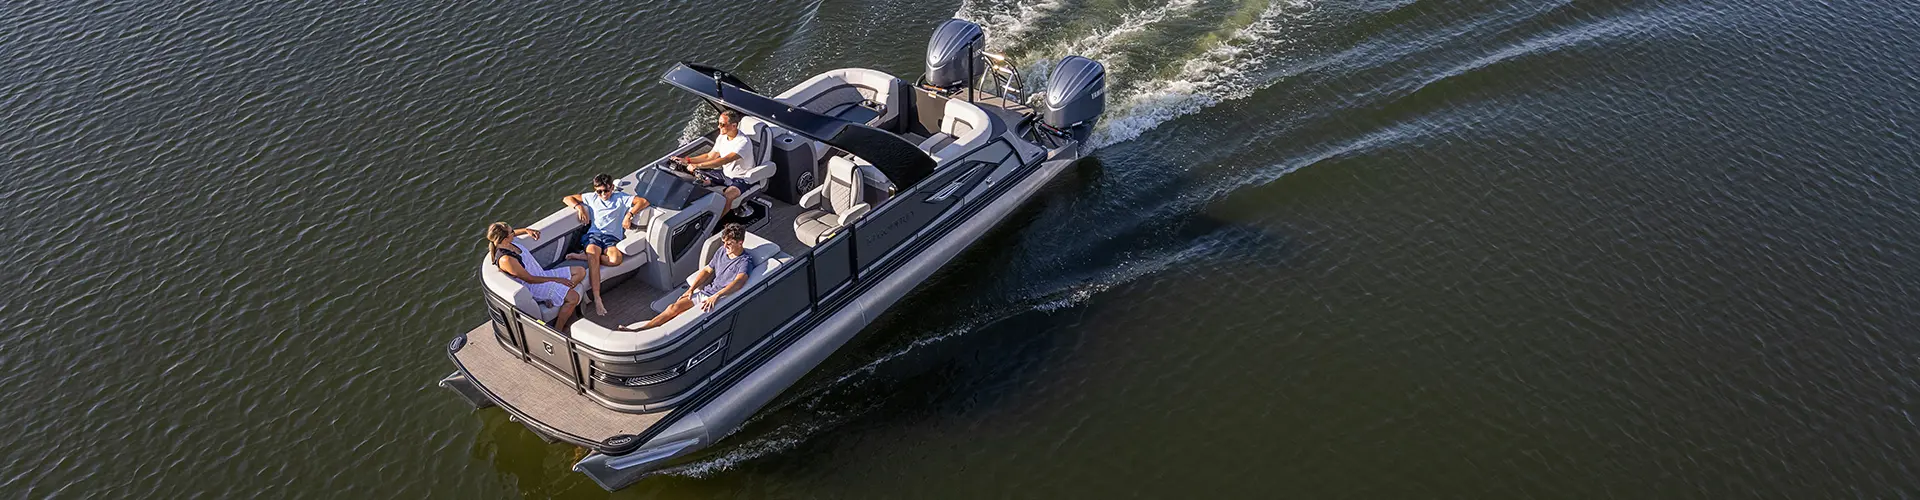 26 Jon Boat Accessories: Catalog of Essential Must Have Ideas